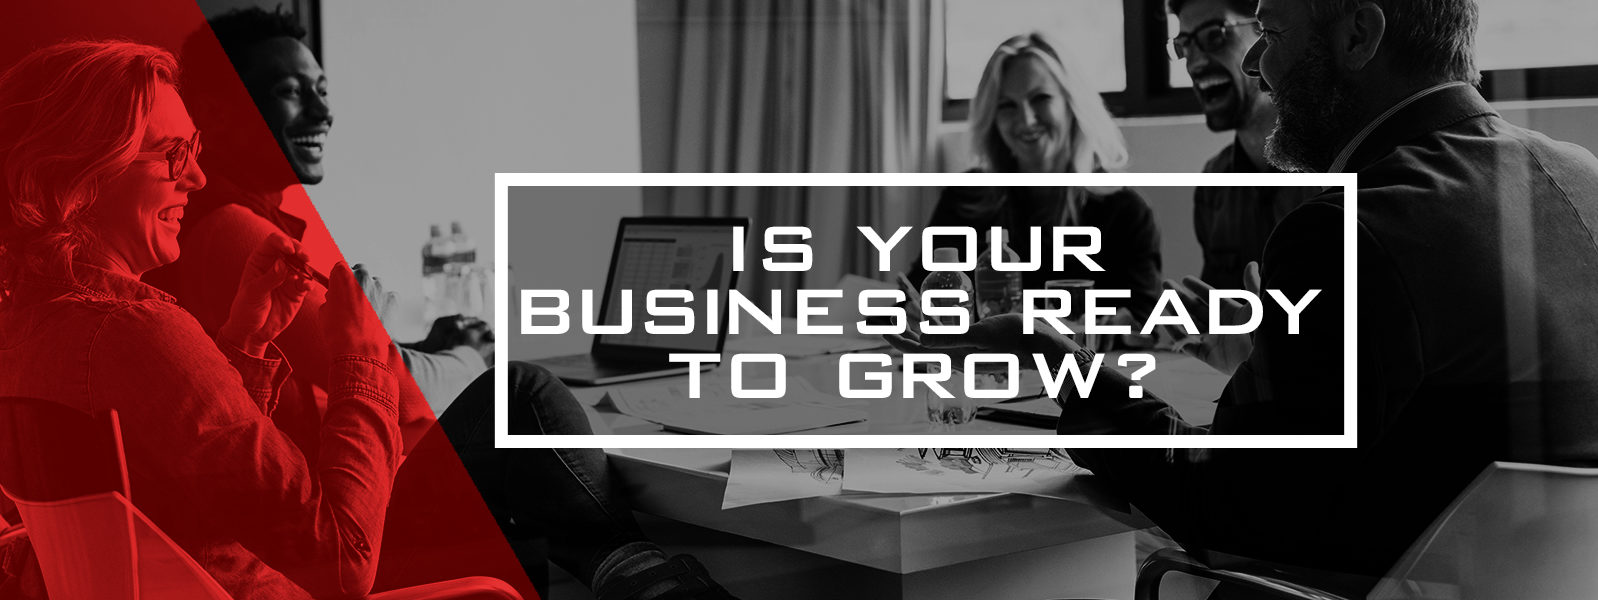 BBSA Is your business Ready to grow?